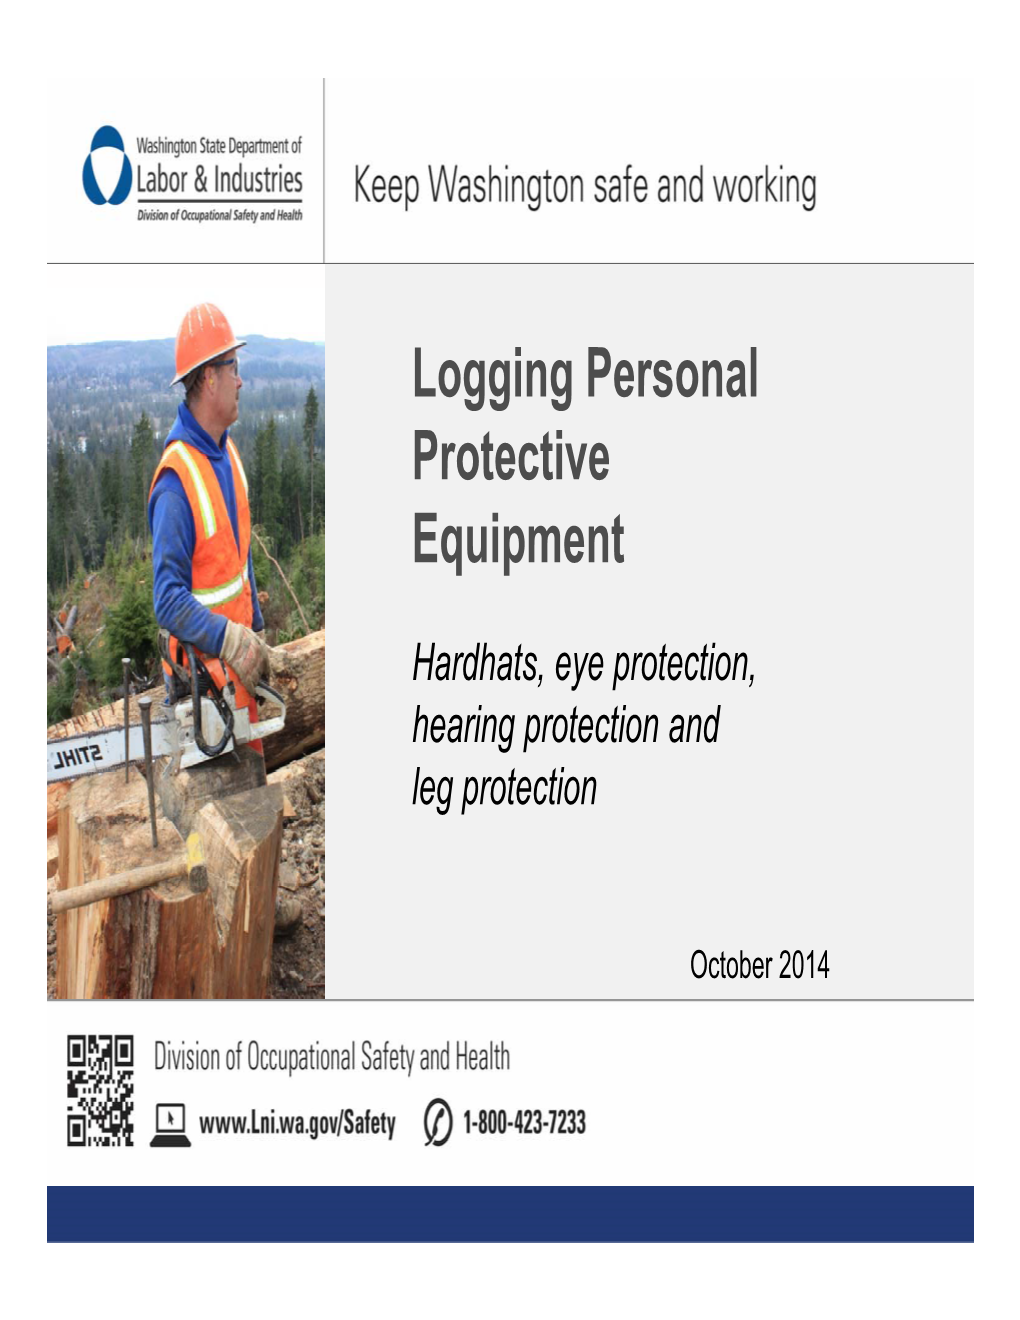 Logging Personal Protective Equipment